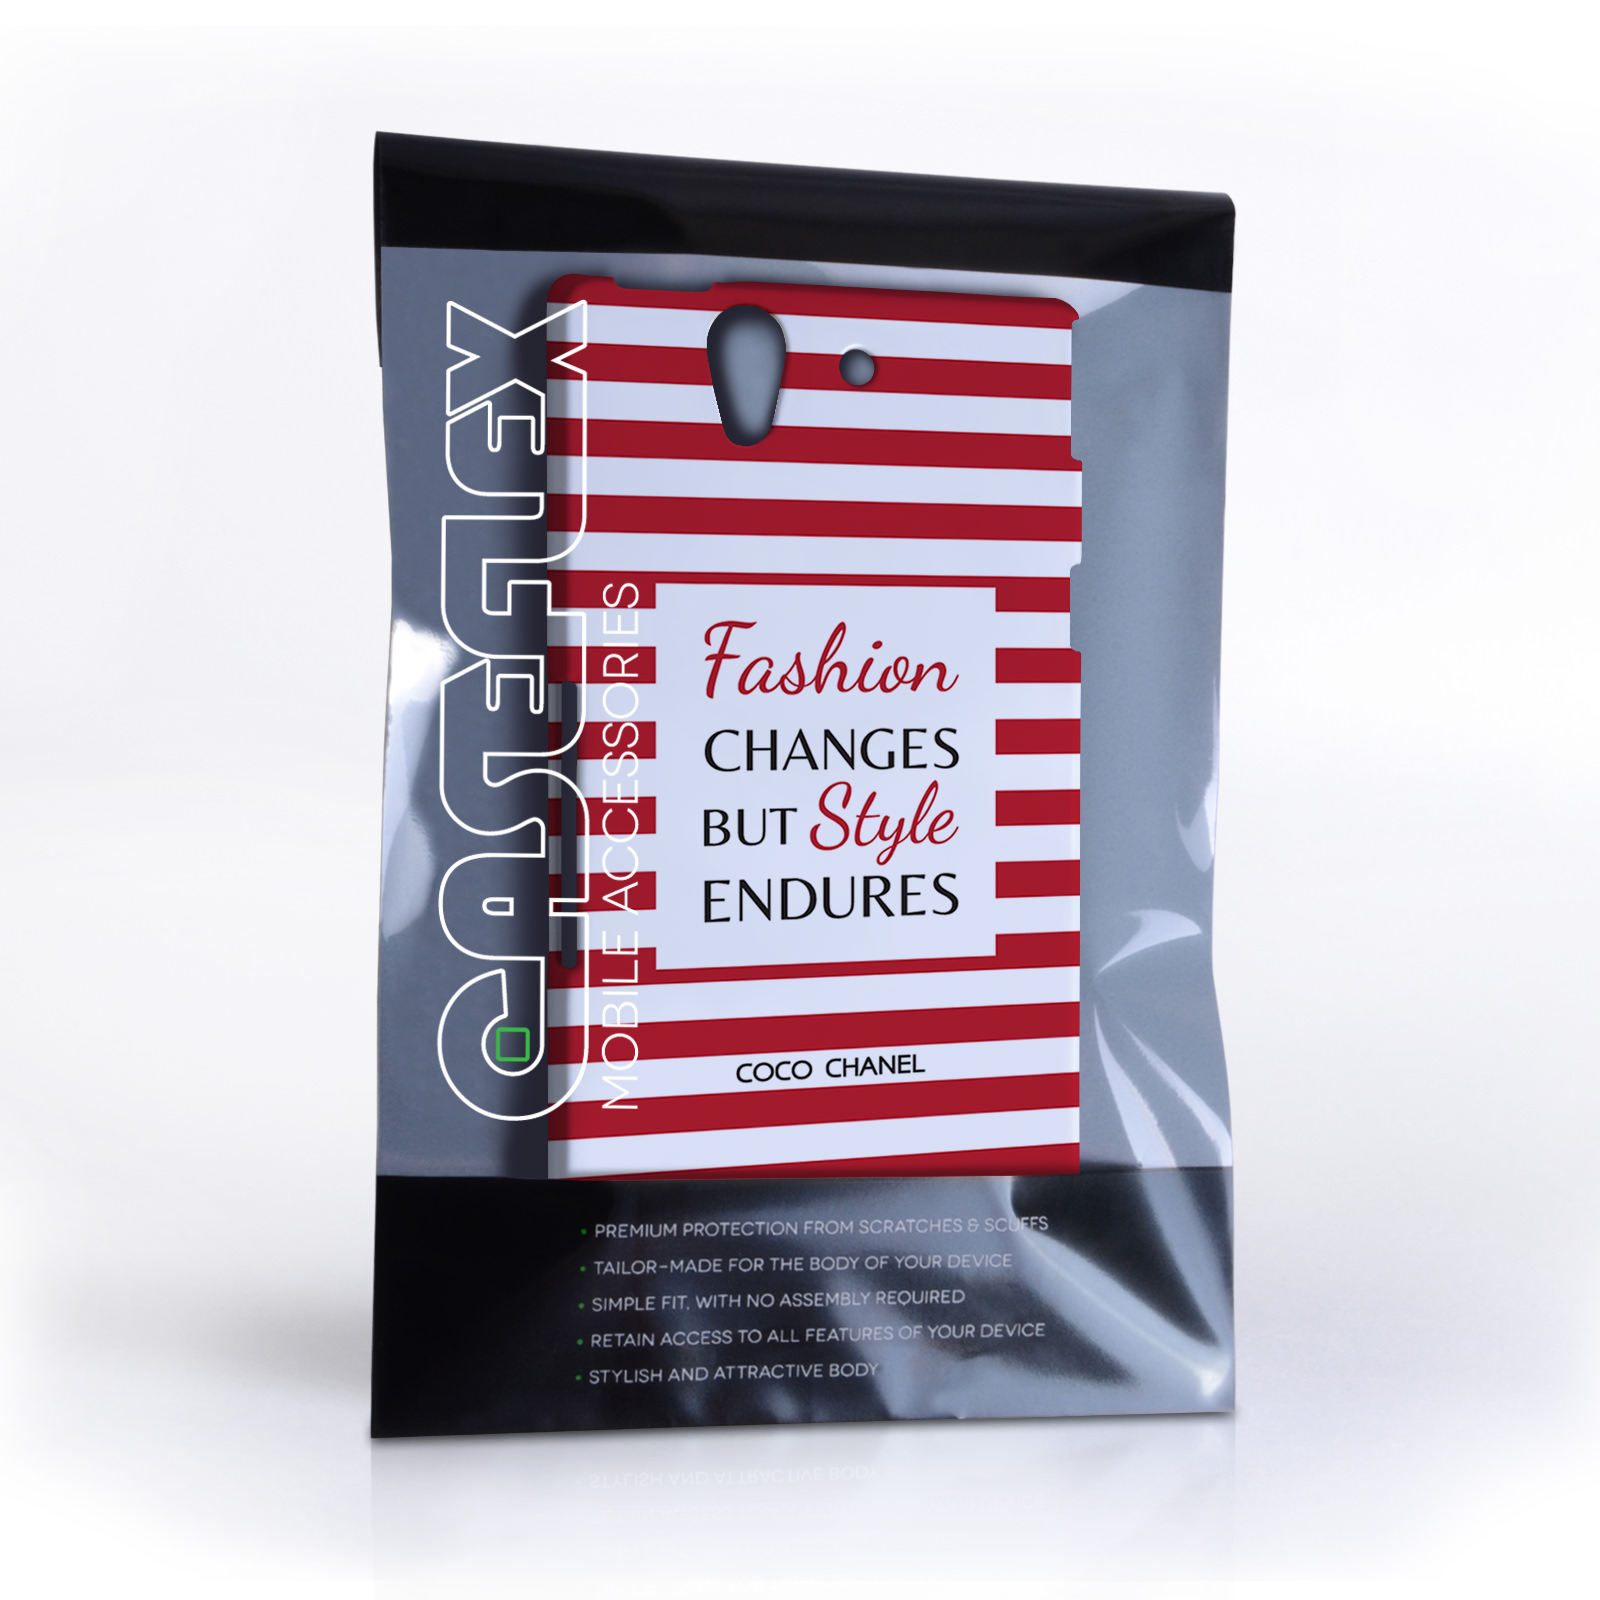 Caseflex Sony Xperia Z Chanel ‘Fashion Changes’ Quote Case – Red and White